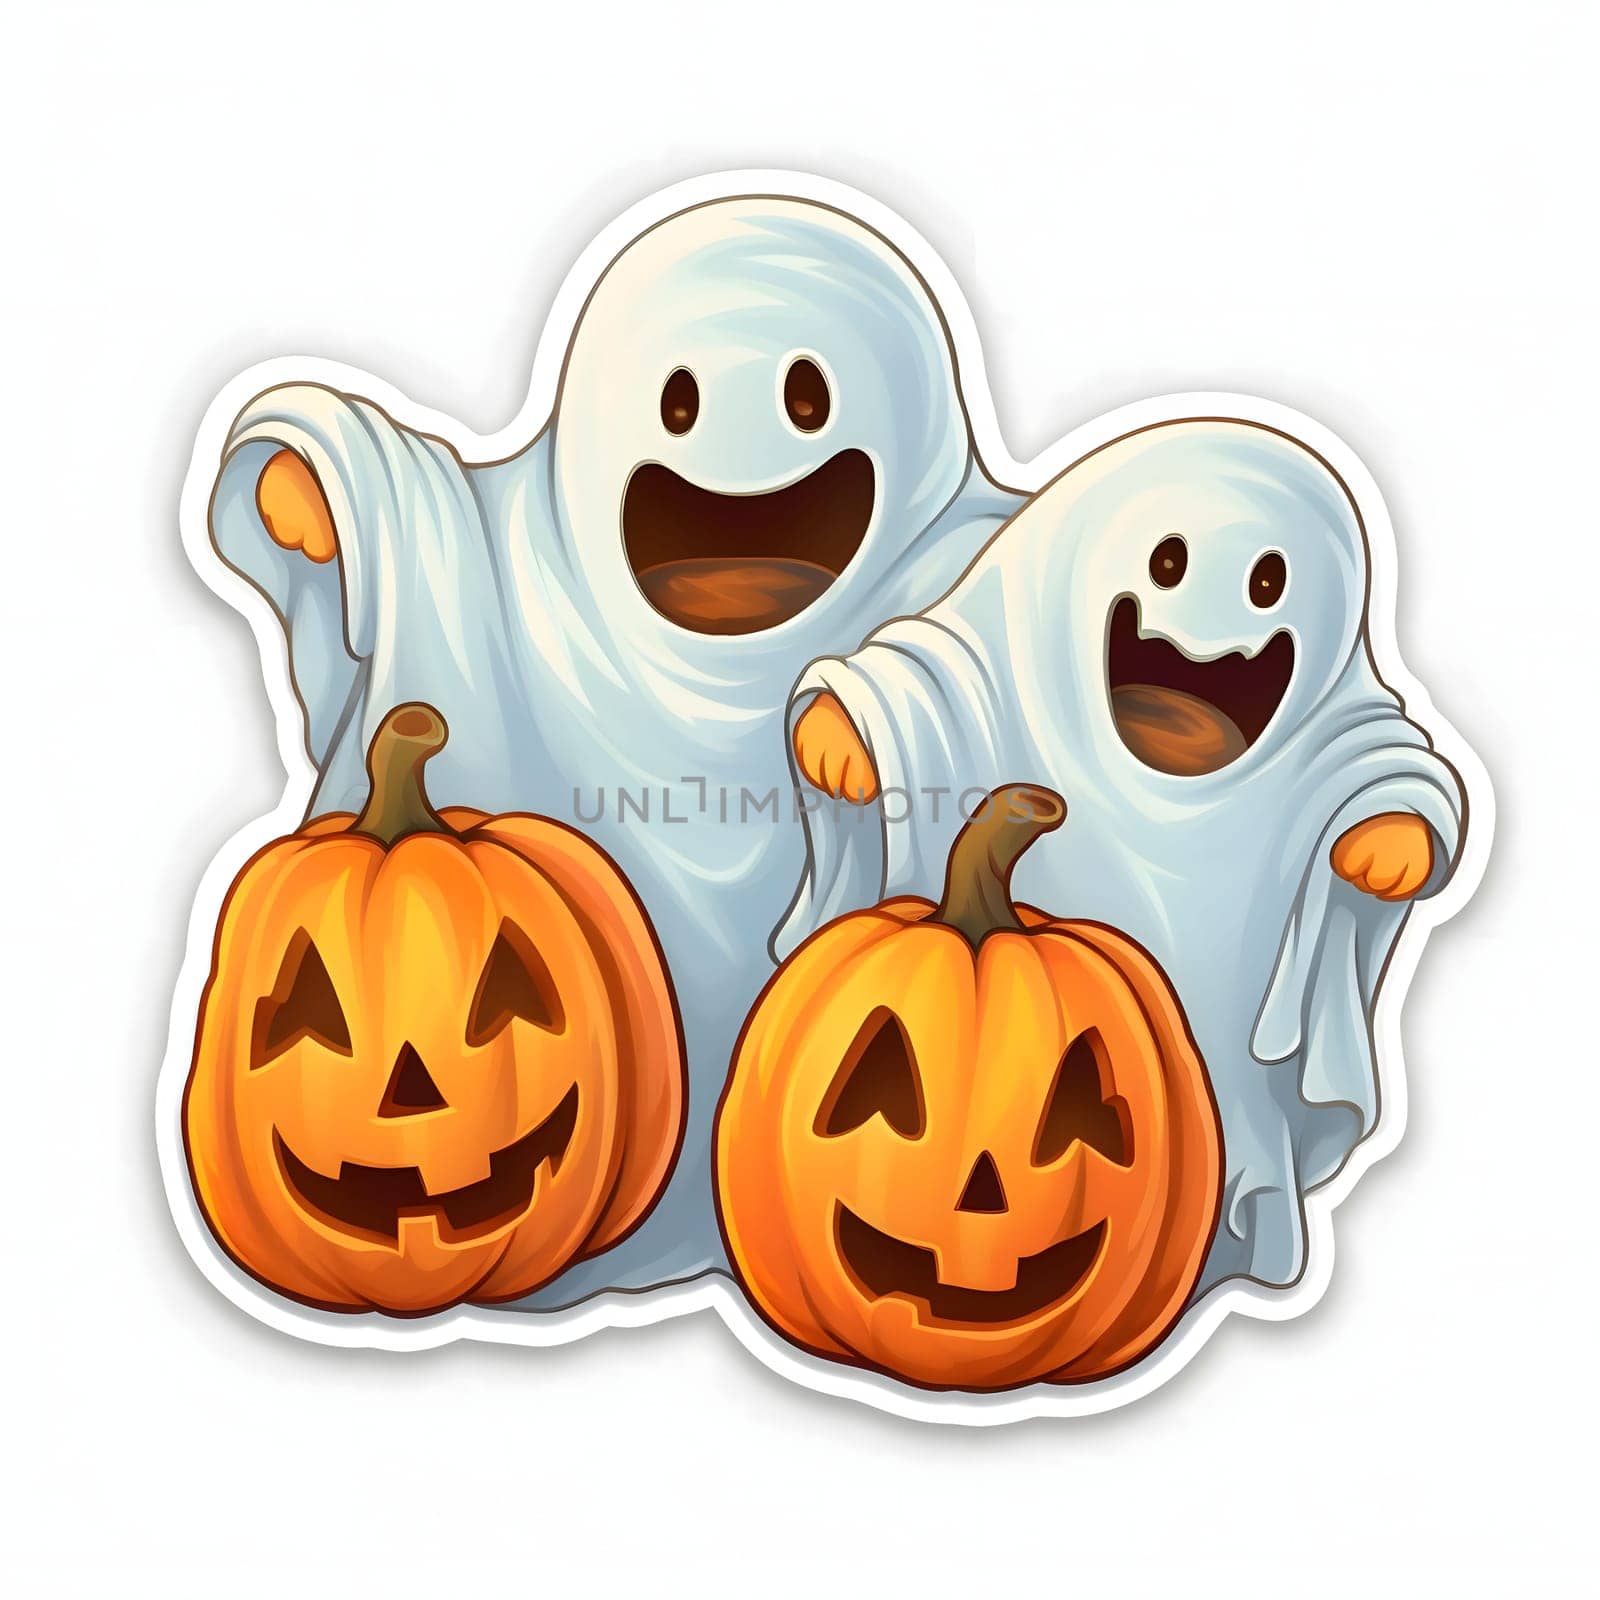 Stickers two frightened ghosts and jack-o-lantern pumpkins, Halloween image on a white isolated background. by ThemesS